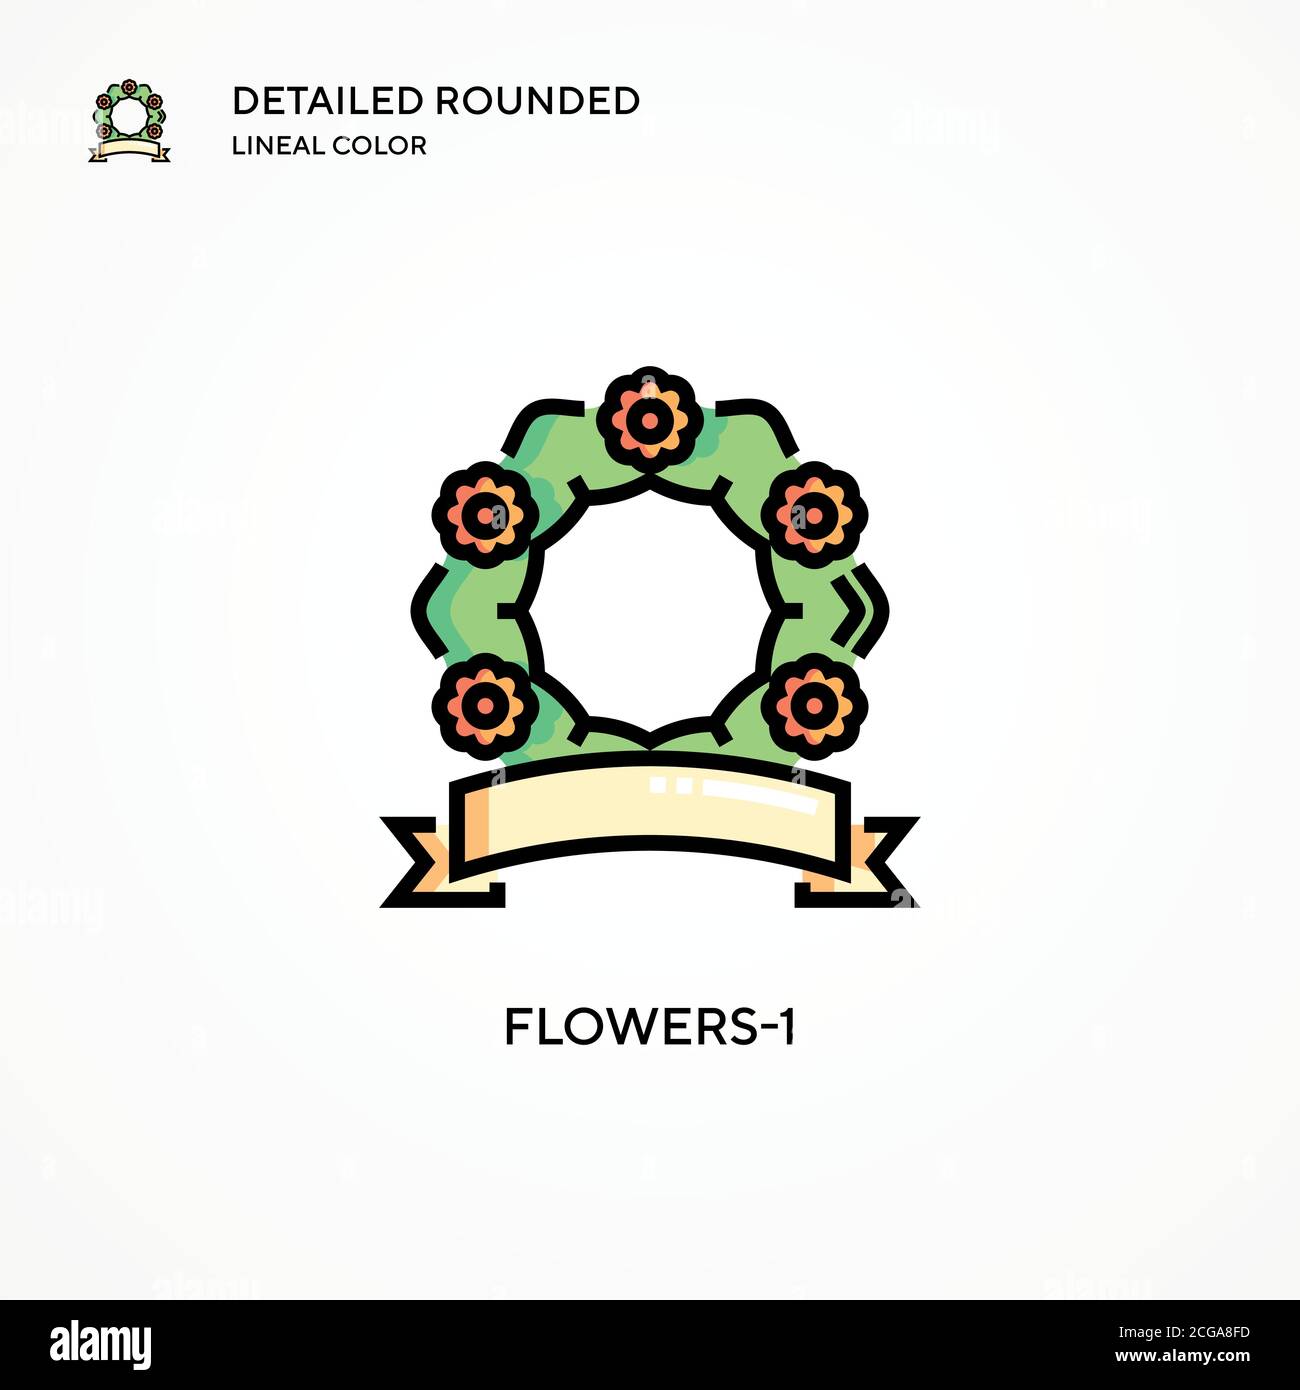 https://c8.alamy.com/comp/2CGA8FD/flowers-1-vector-icon-modern-vector-illustration-concepts-easy-to-edit-and-customize-2CGA8FD.jpg